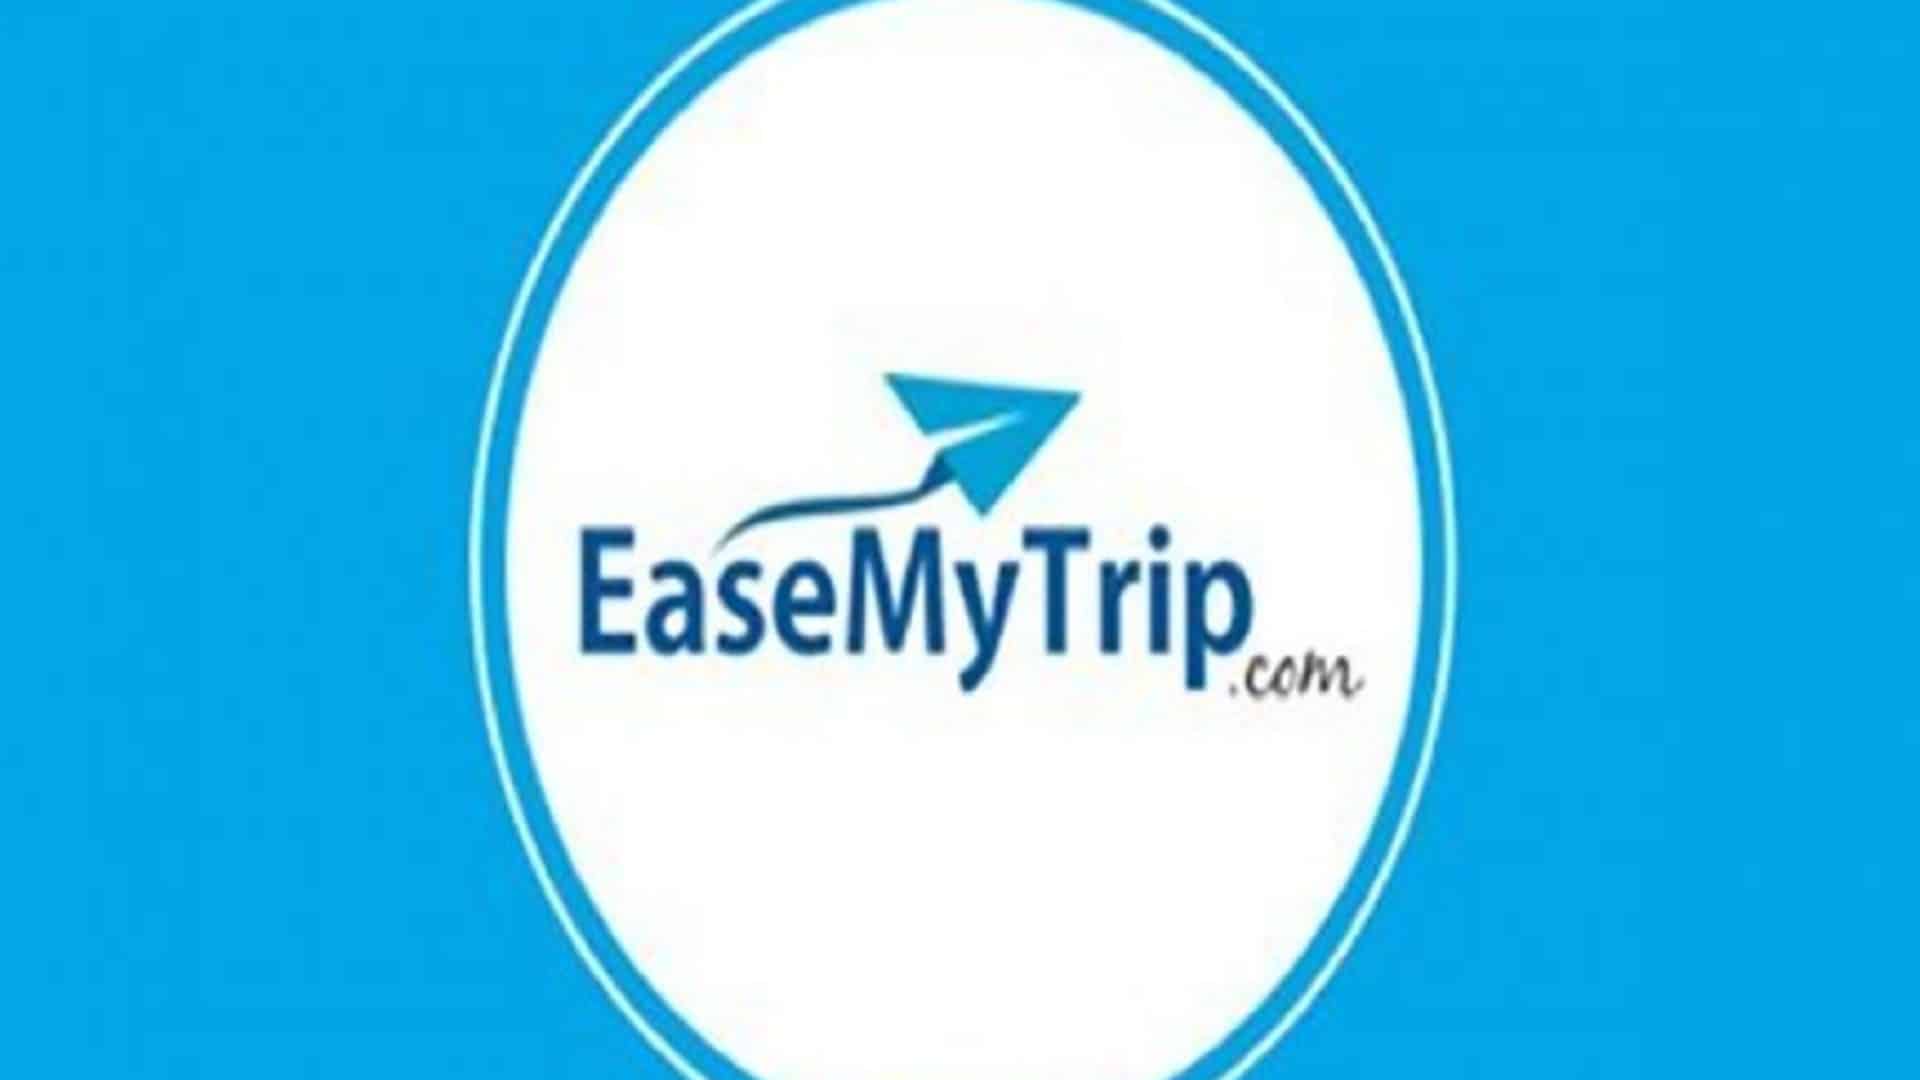 EaseMyTrip acquires hospitality management firm Spree Hospitality